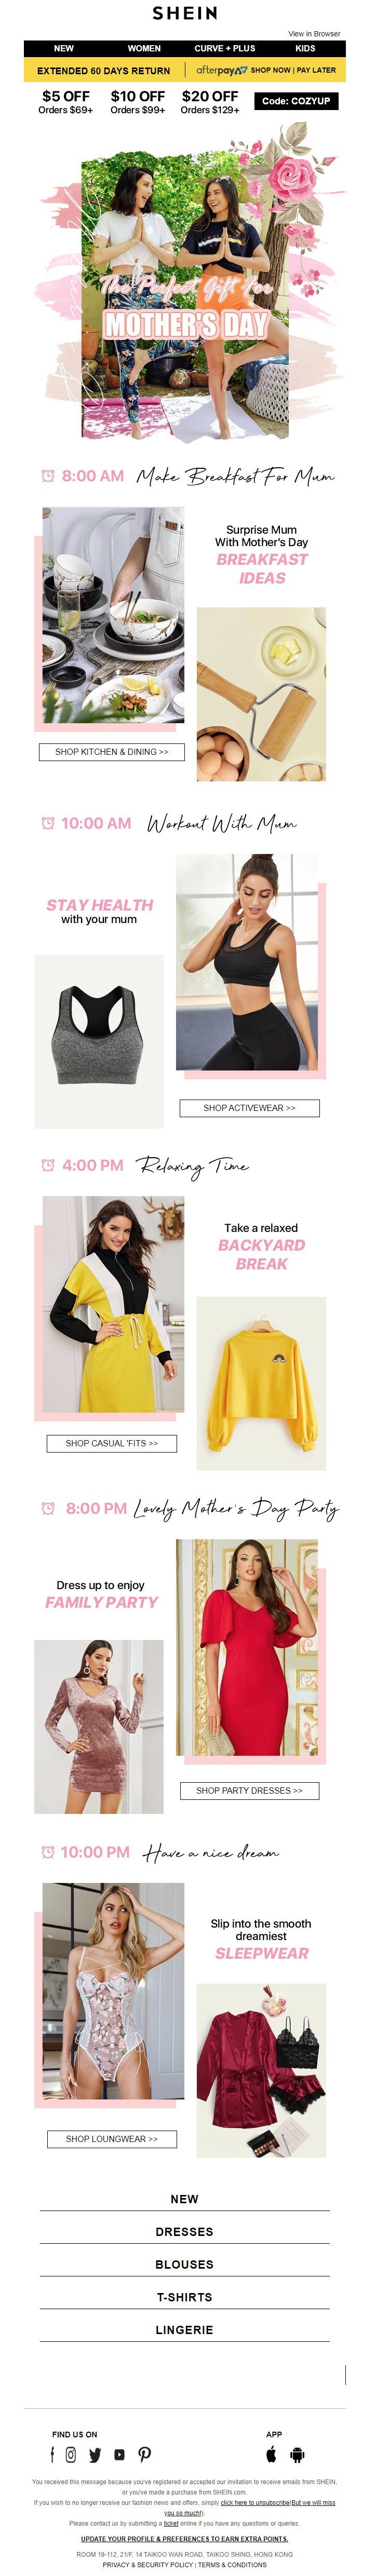 Gift cards in just a few clicks _ Email example from Shein